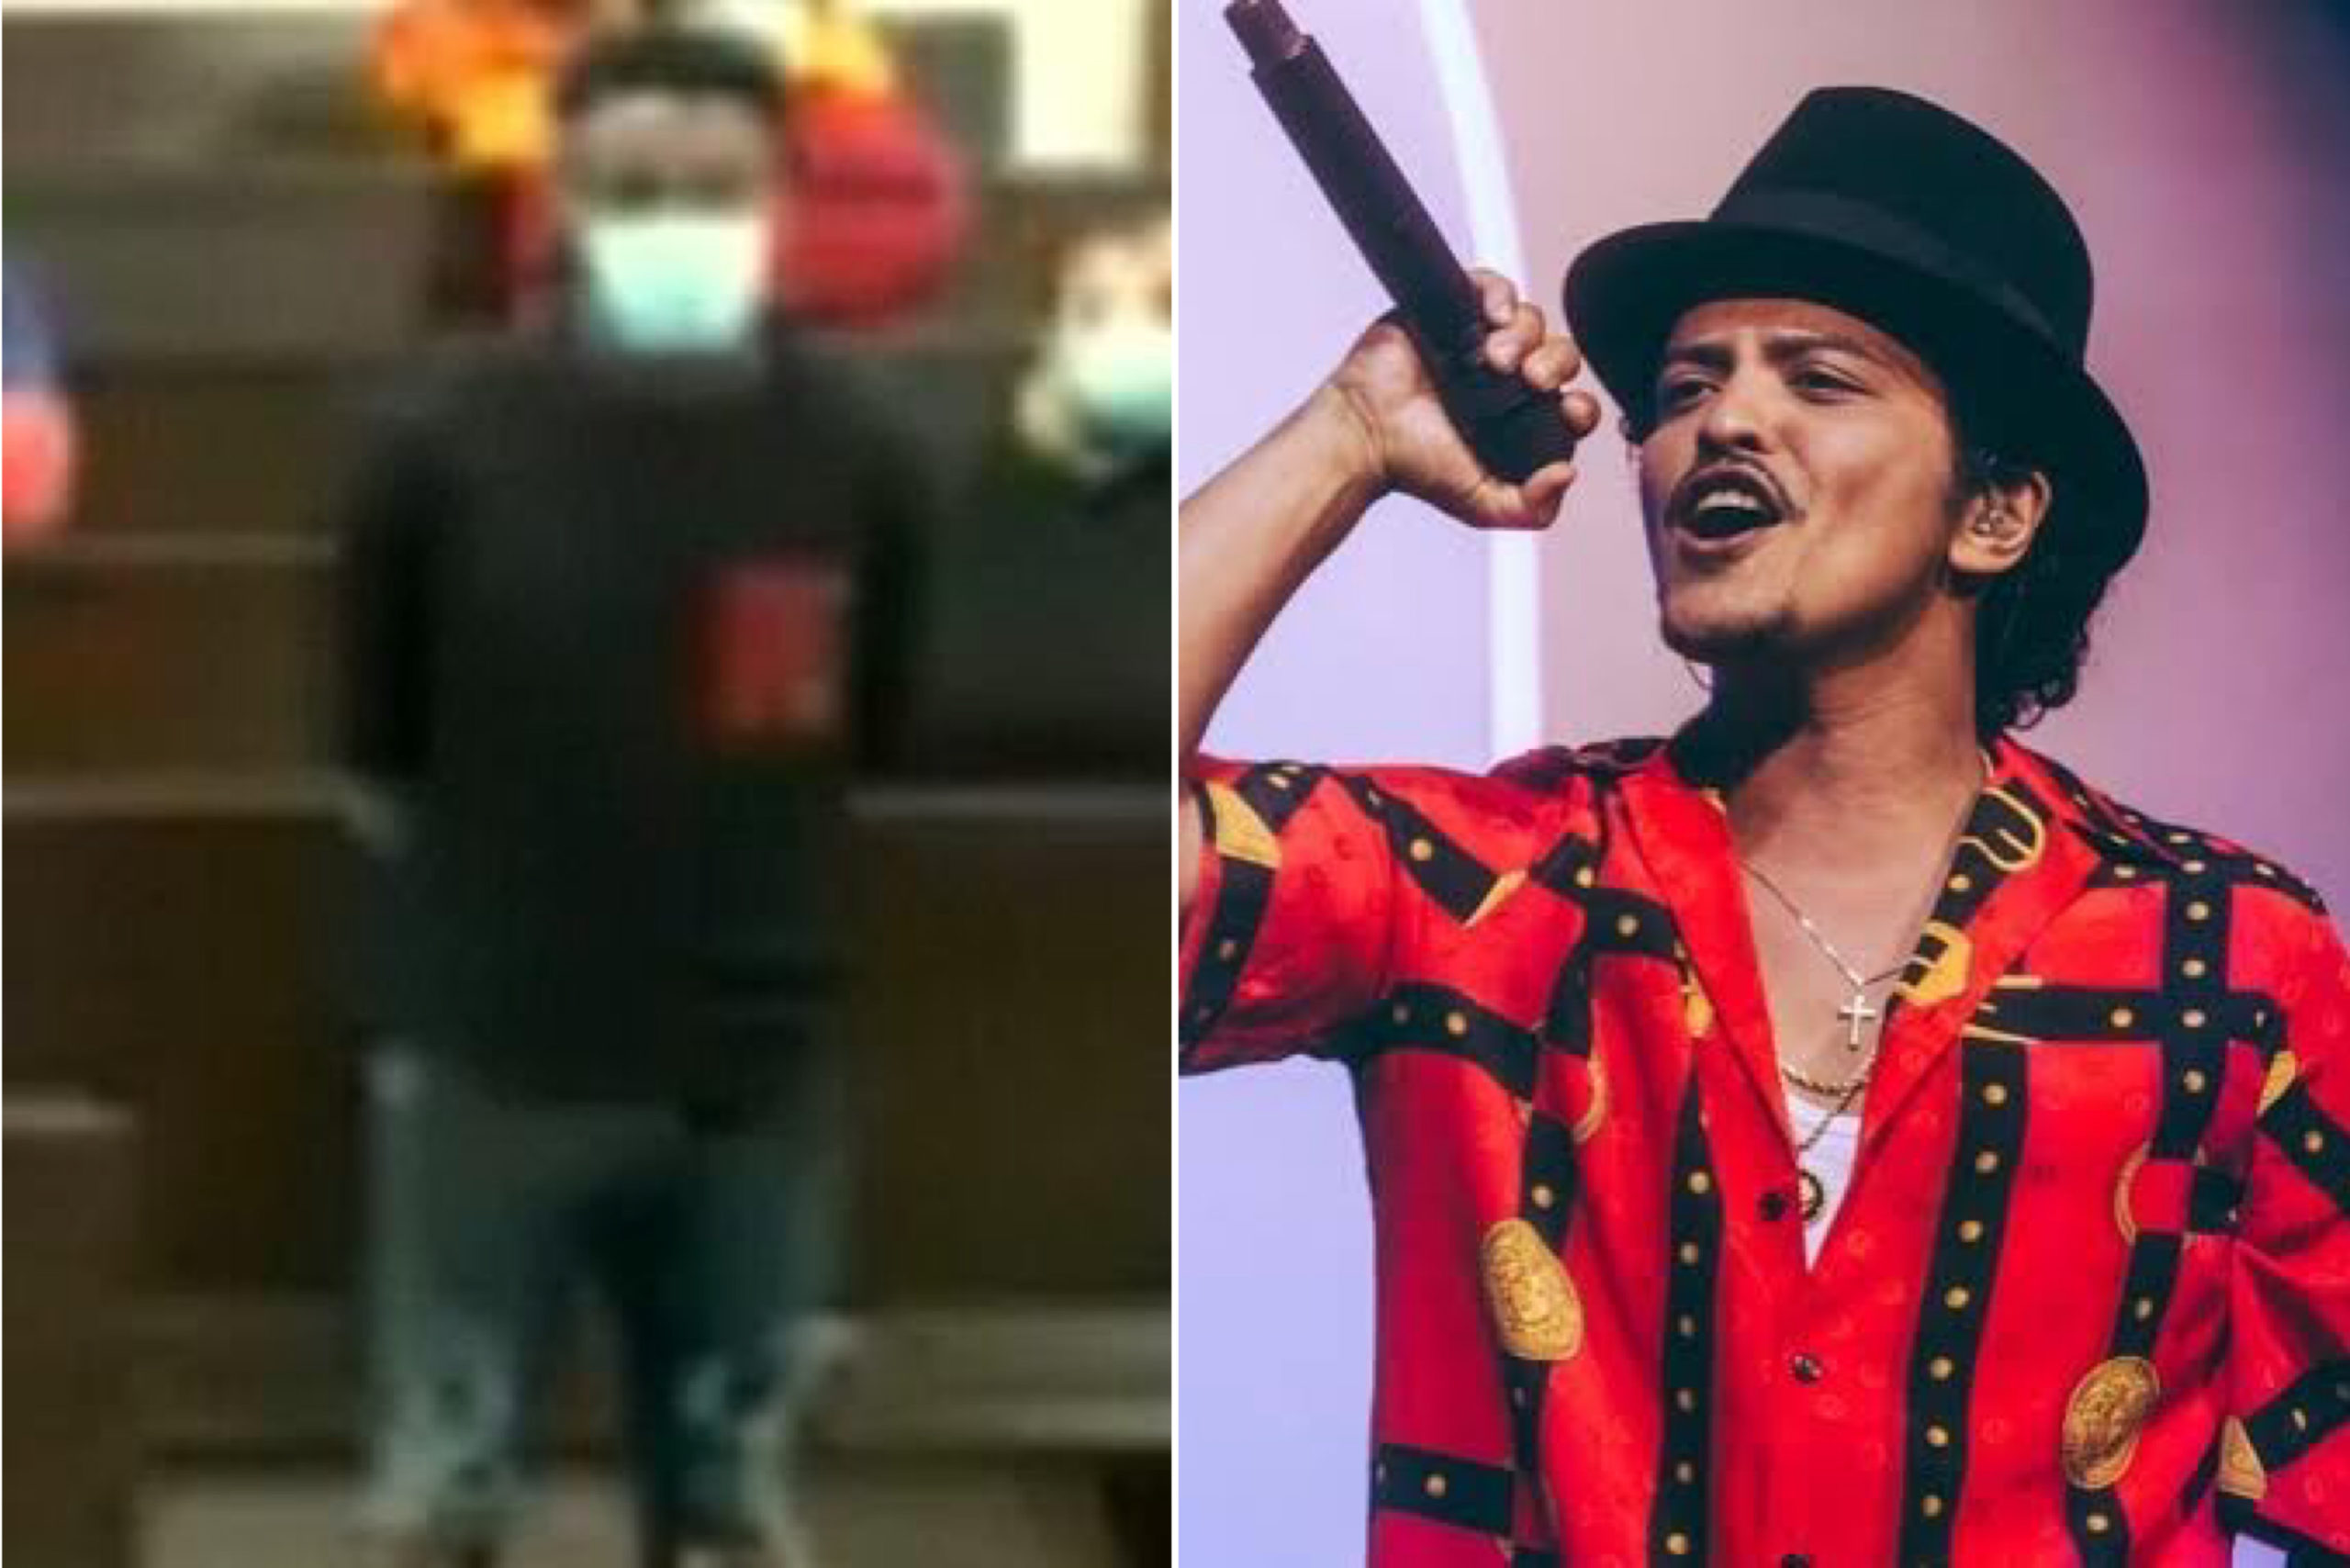 Romance Scam: Two Nigerian Men Swindle $100,000 Out Of Texas Woman Who Believed She Was Dating Bruno Mars